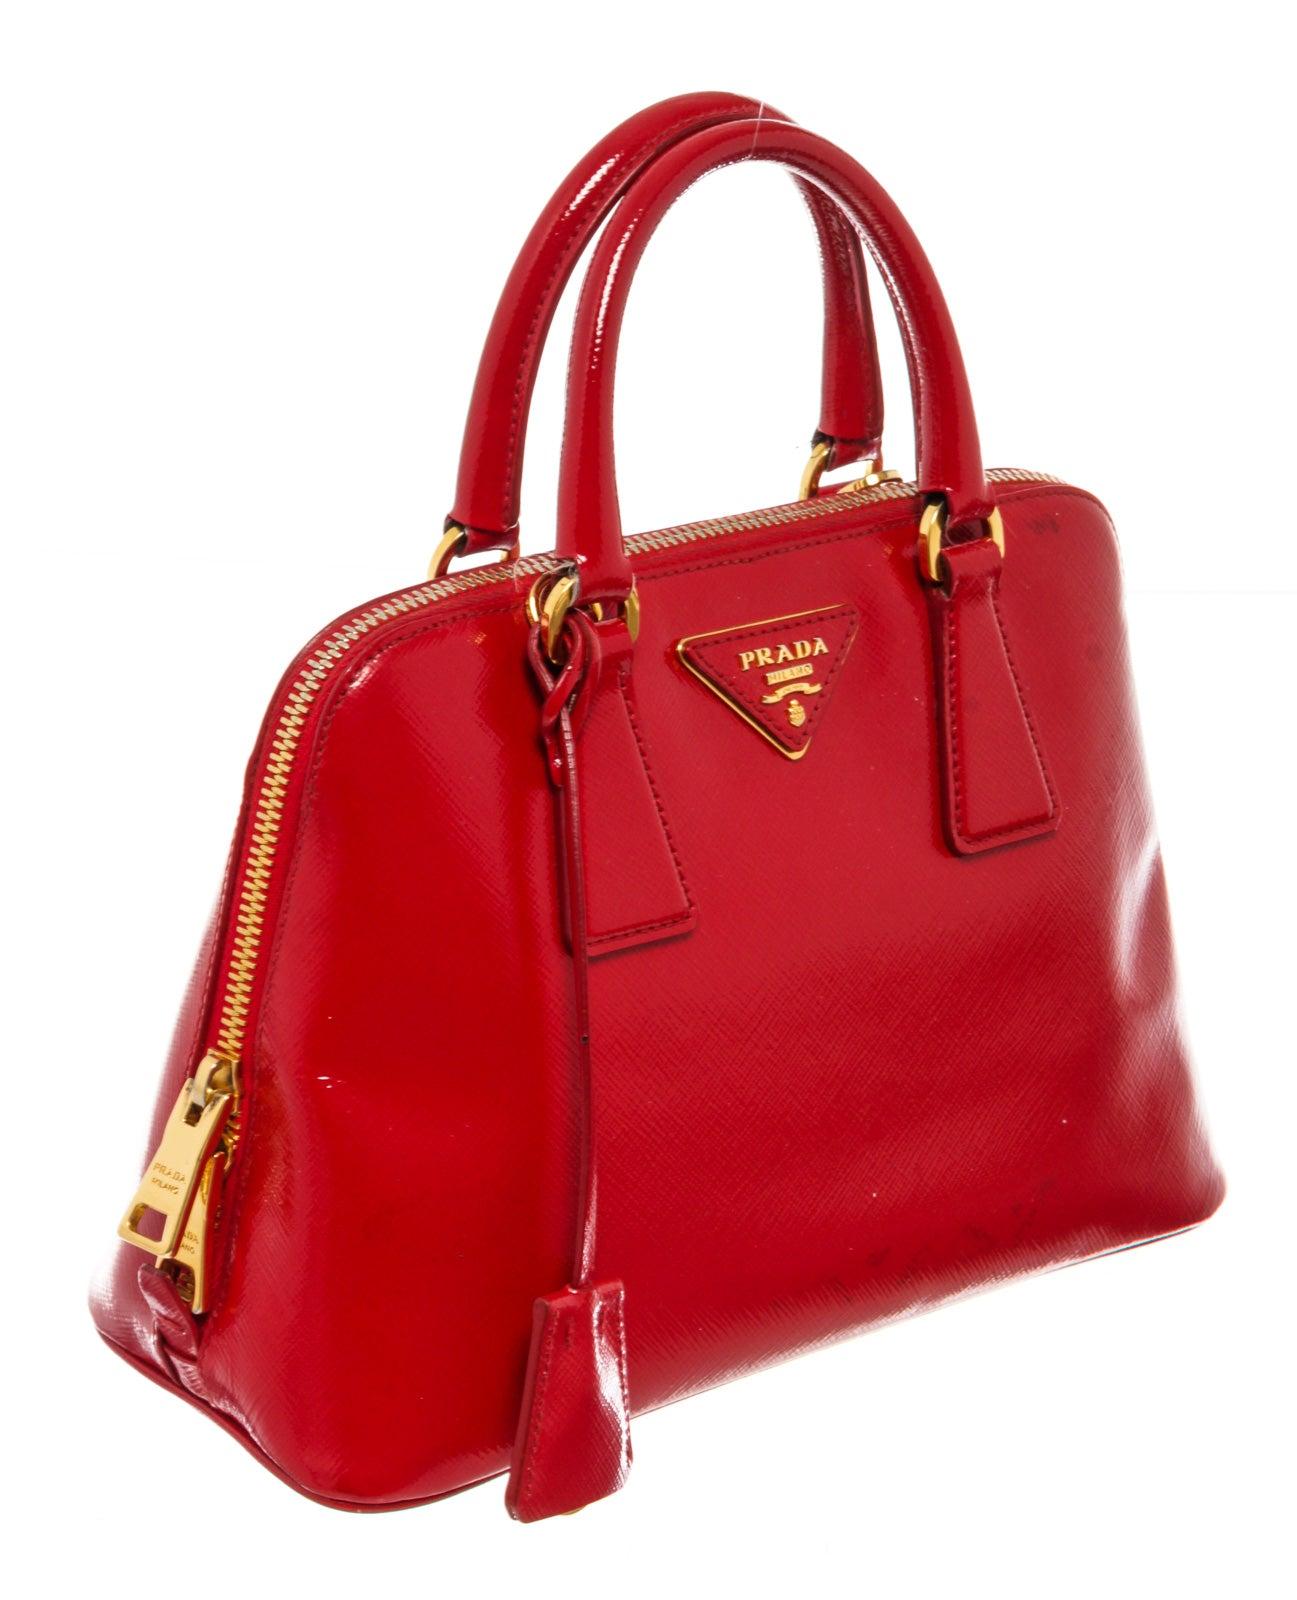 Prada Top Handle bag is made of gorgeous sleek red glossy Saffiano Vernice patent leather with bold gold-tone hardware. This top handle bag features a zip around closure and a spacious interior with several compartments and red jacquard canvas